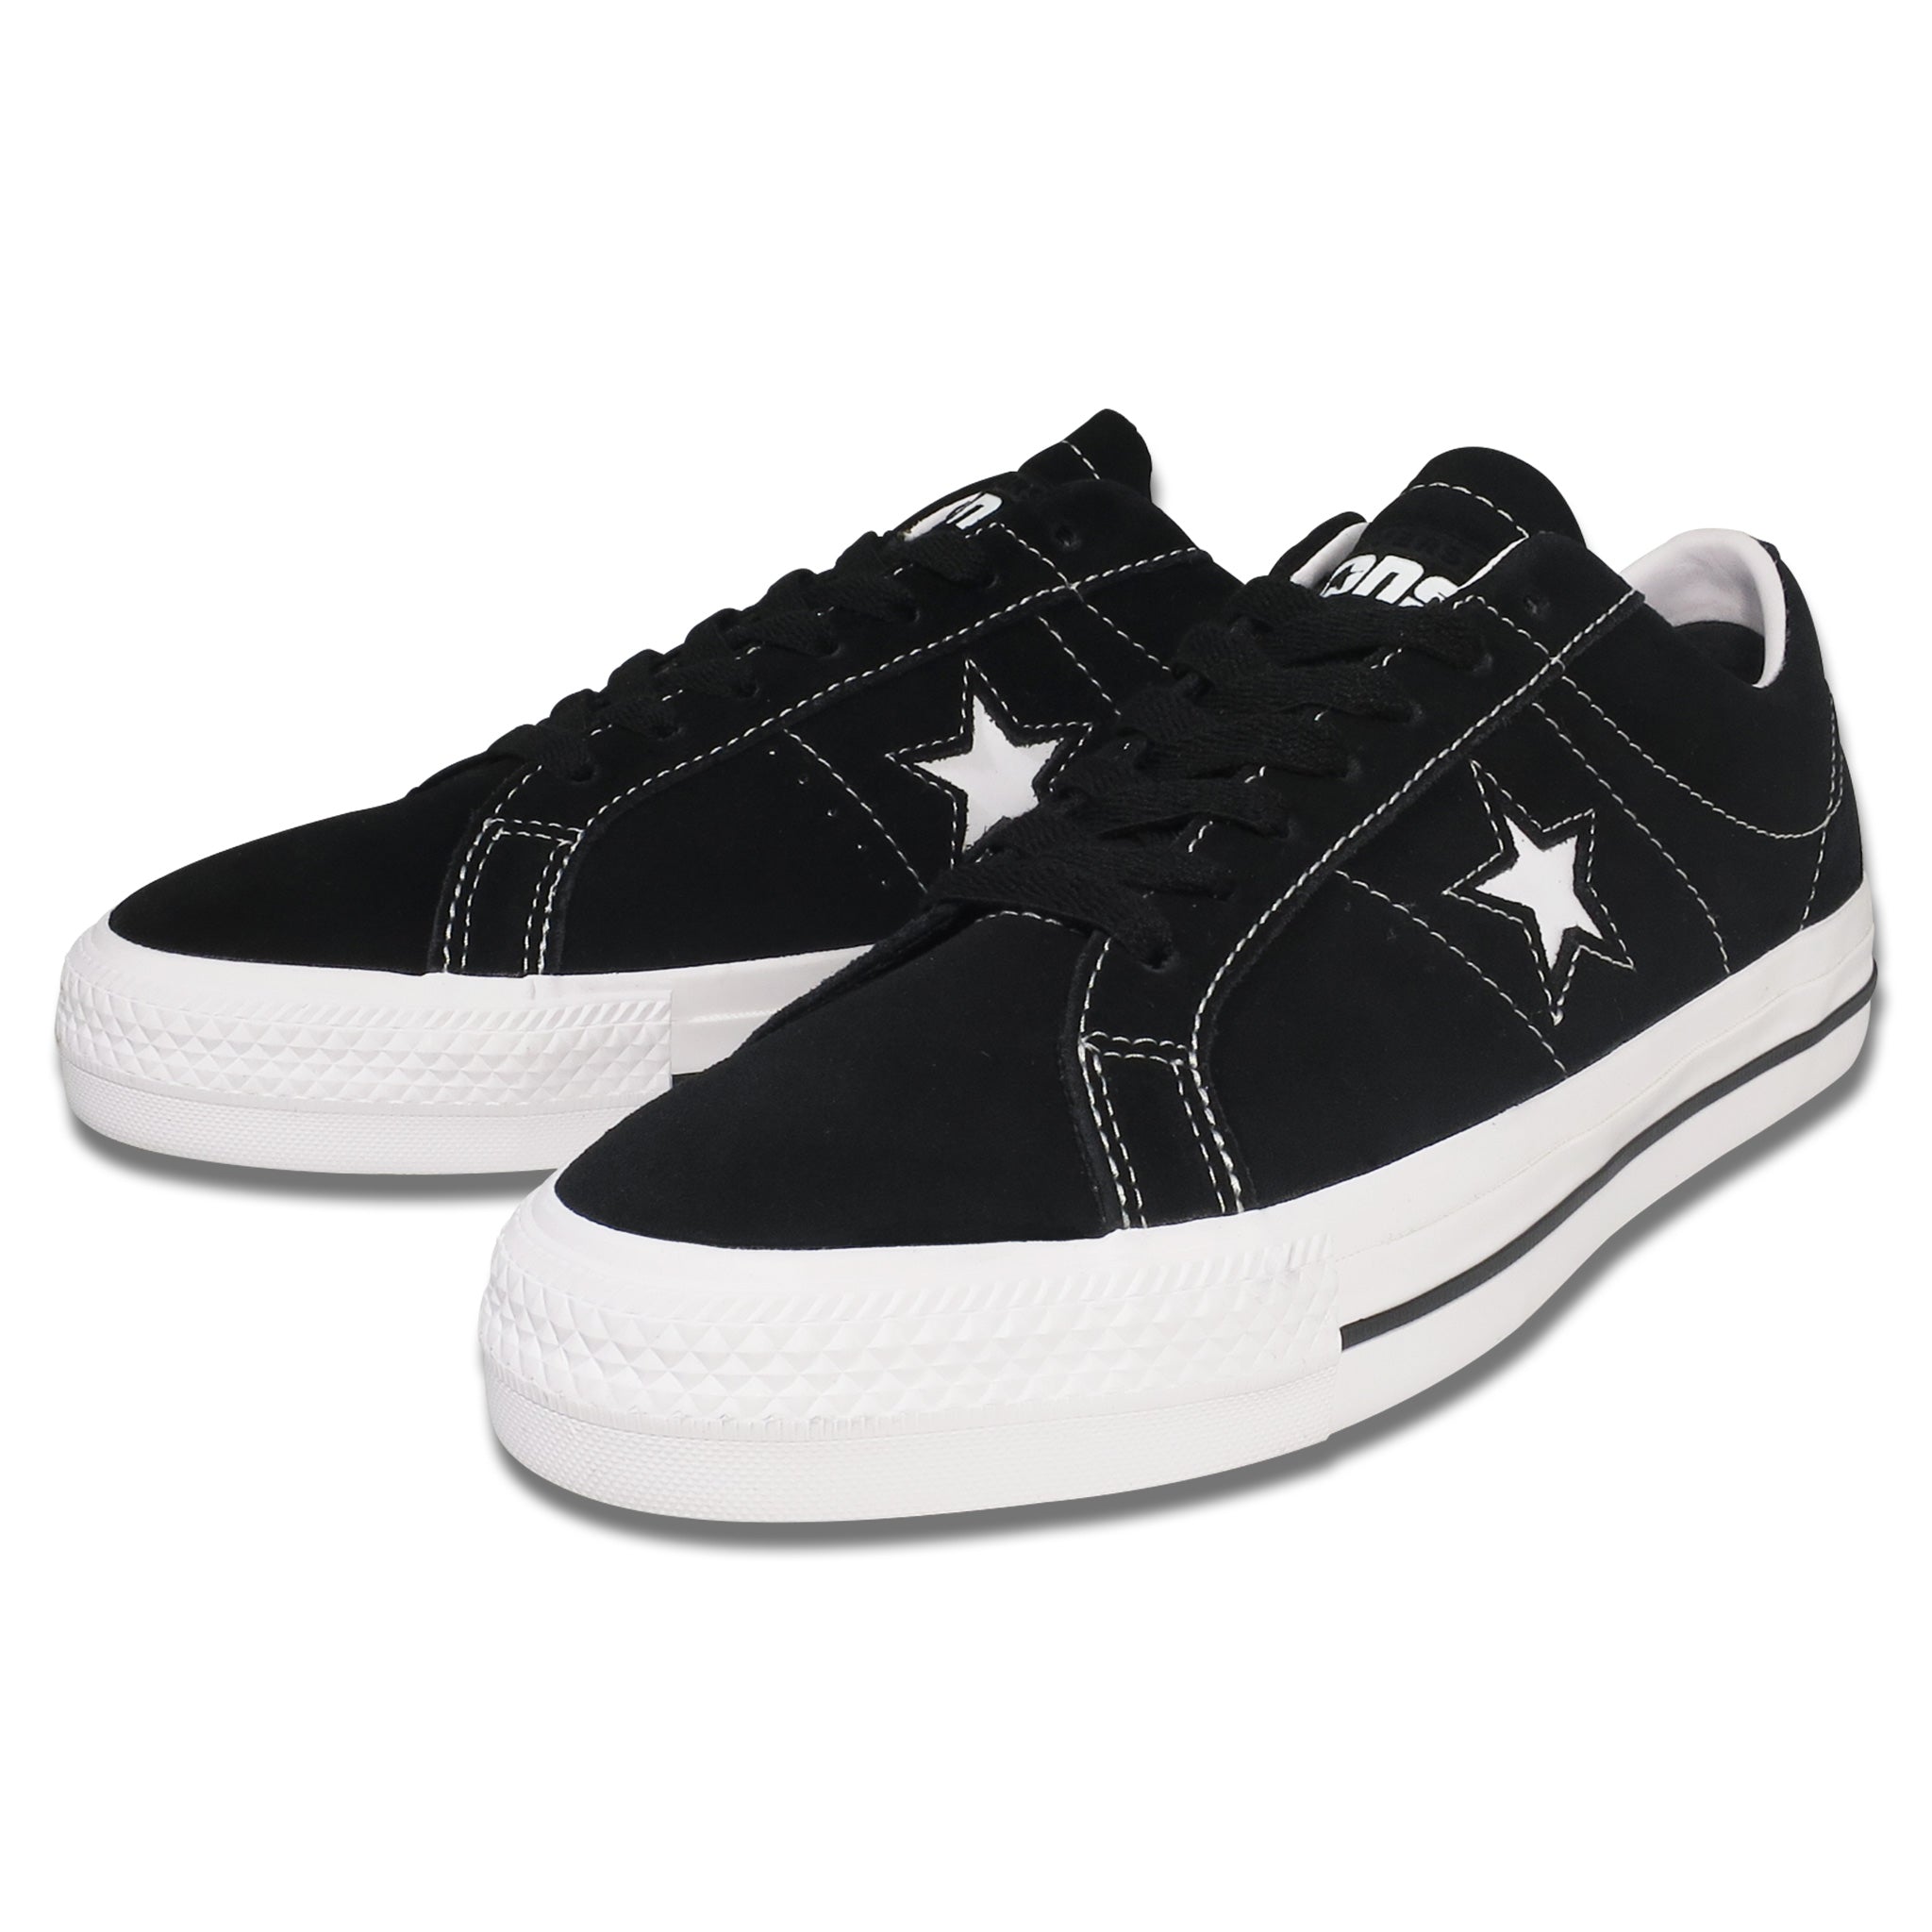 CONS ONE STAR SKATE OX BLACK  26.5cmCT70